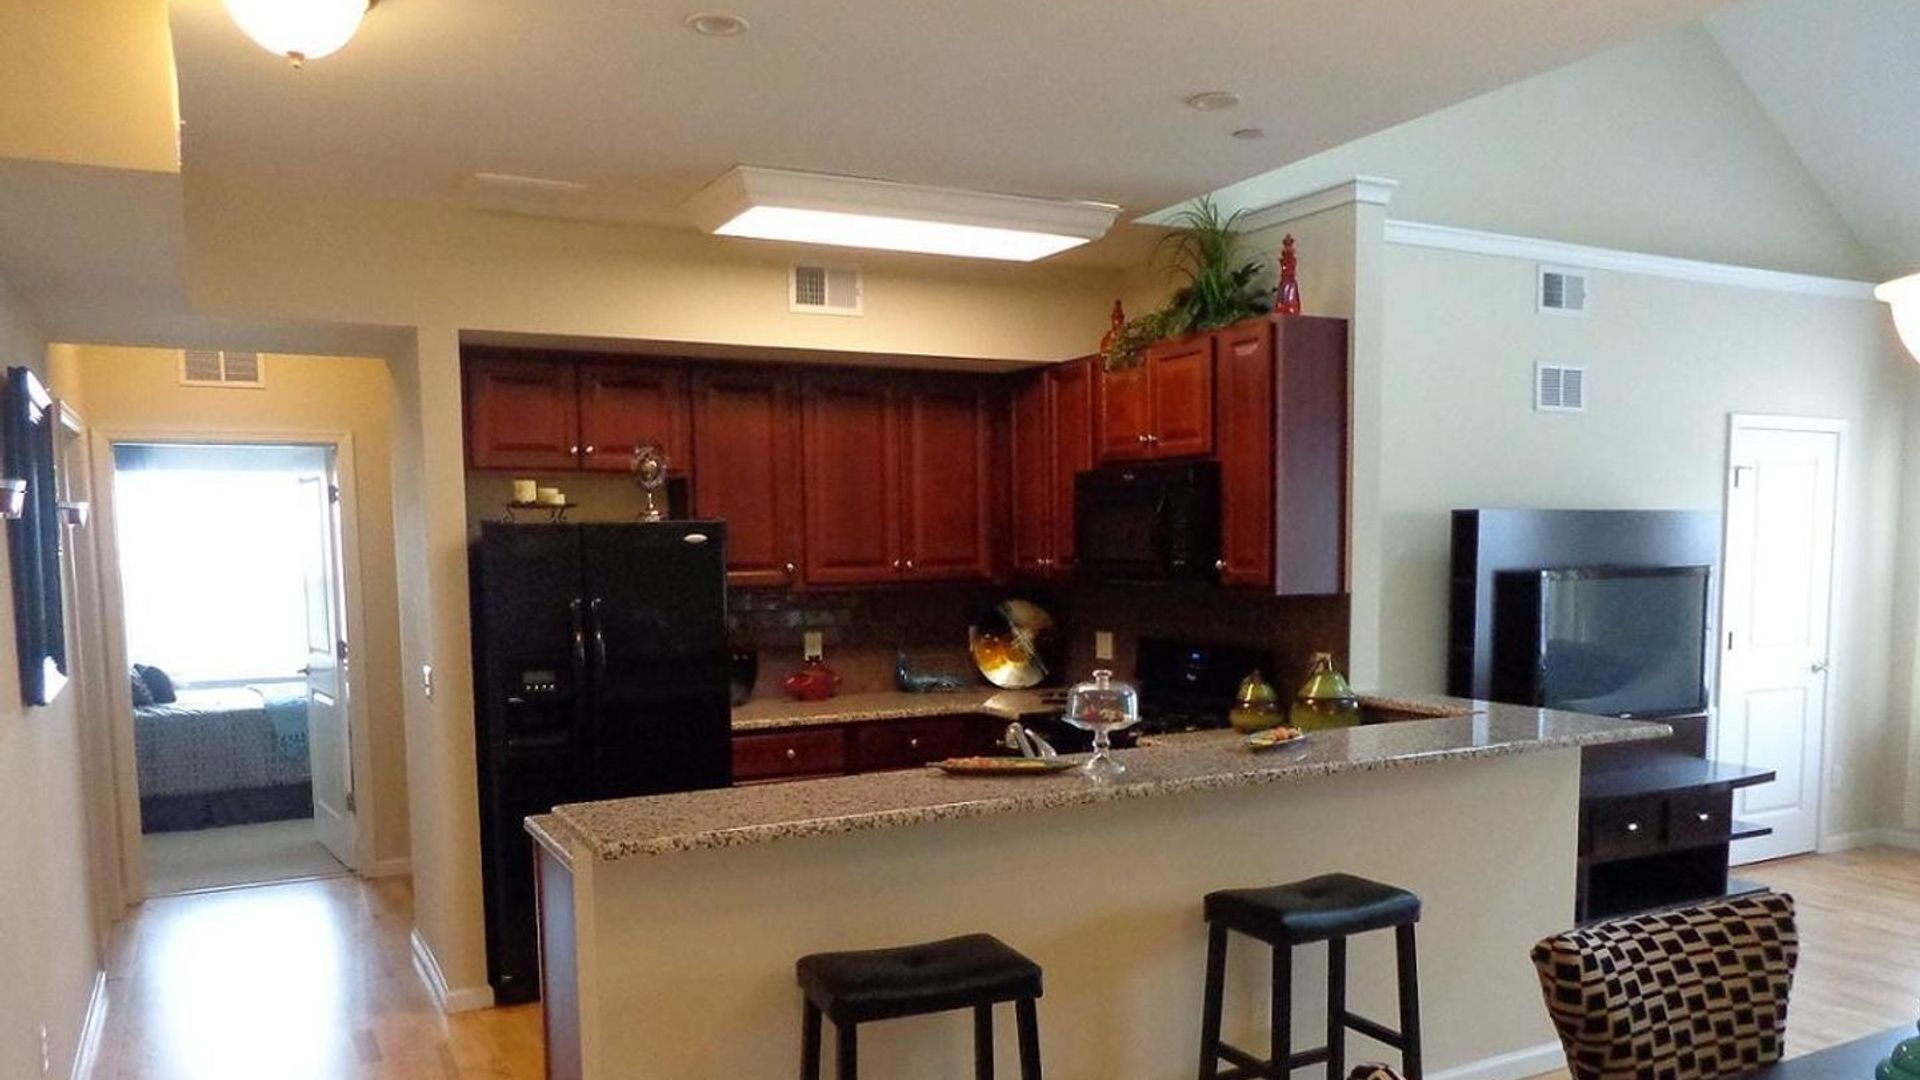 2 bedroom apartment at Heritage Park Cultural Center, US 9 ...